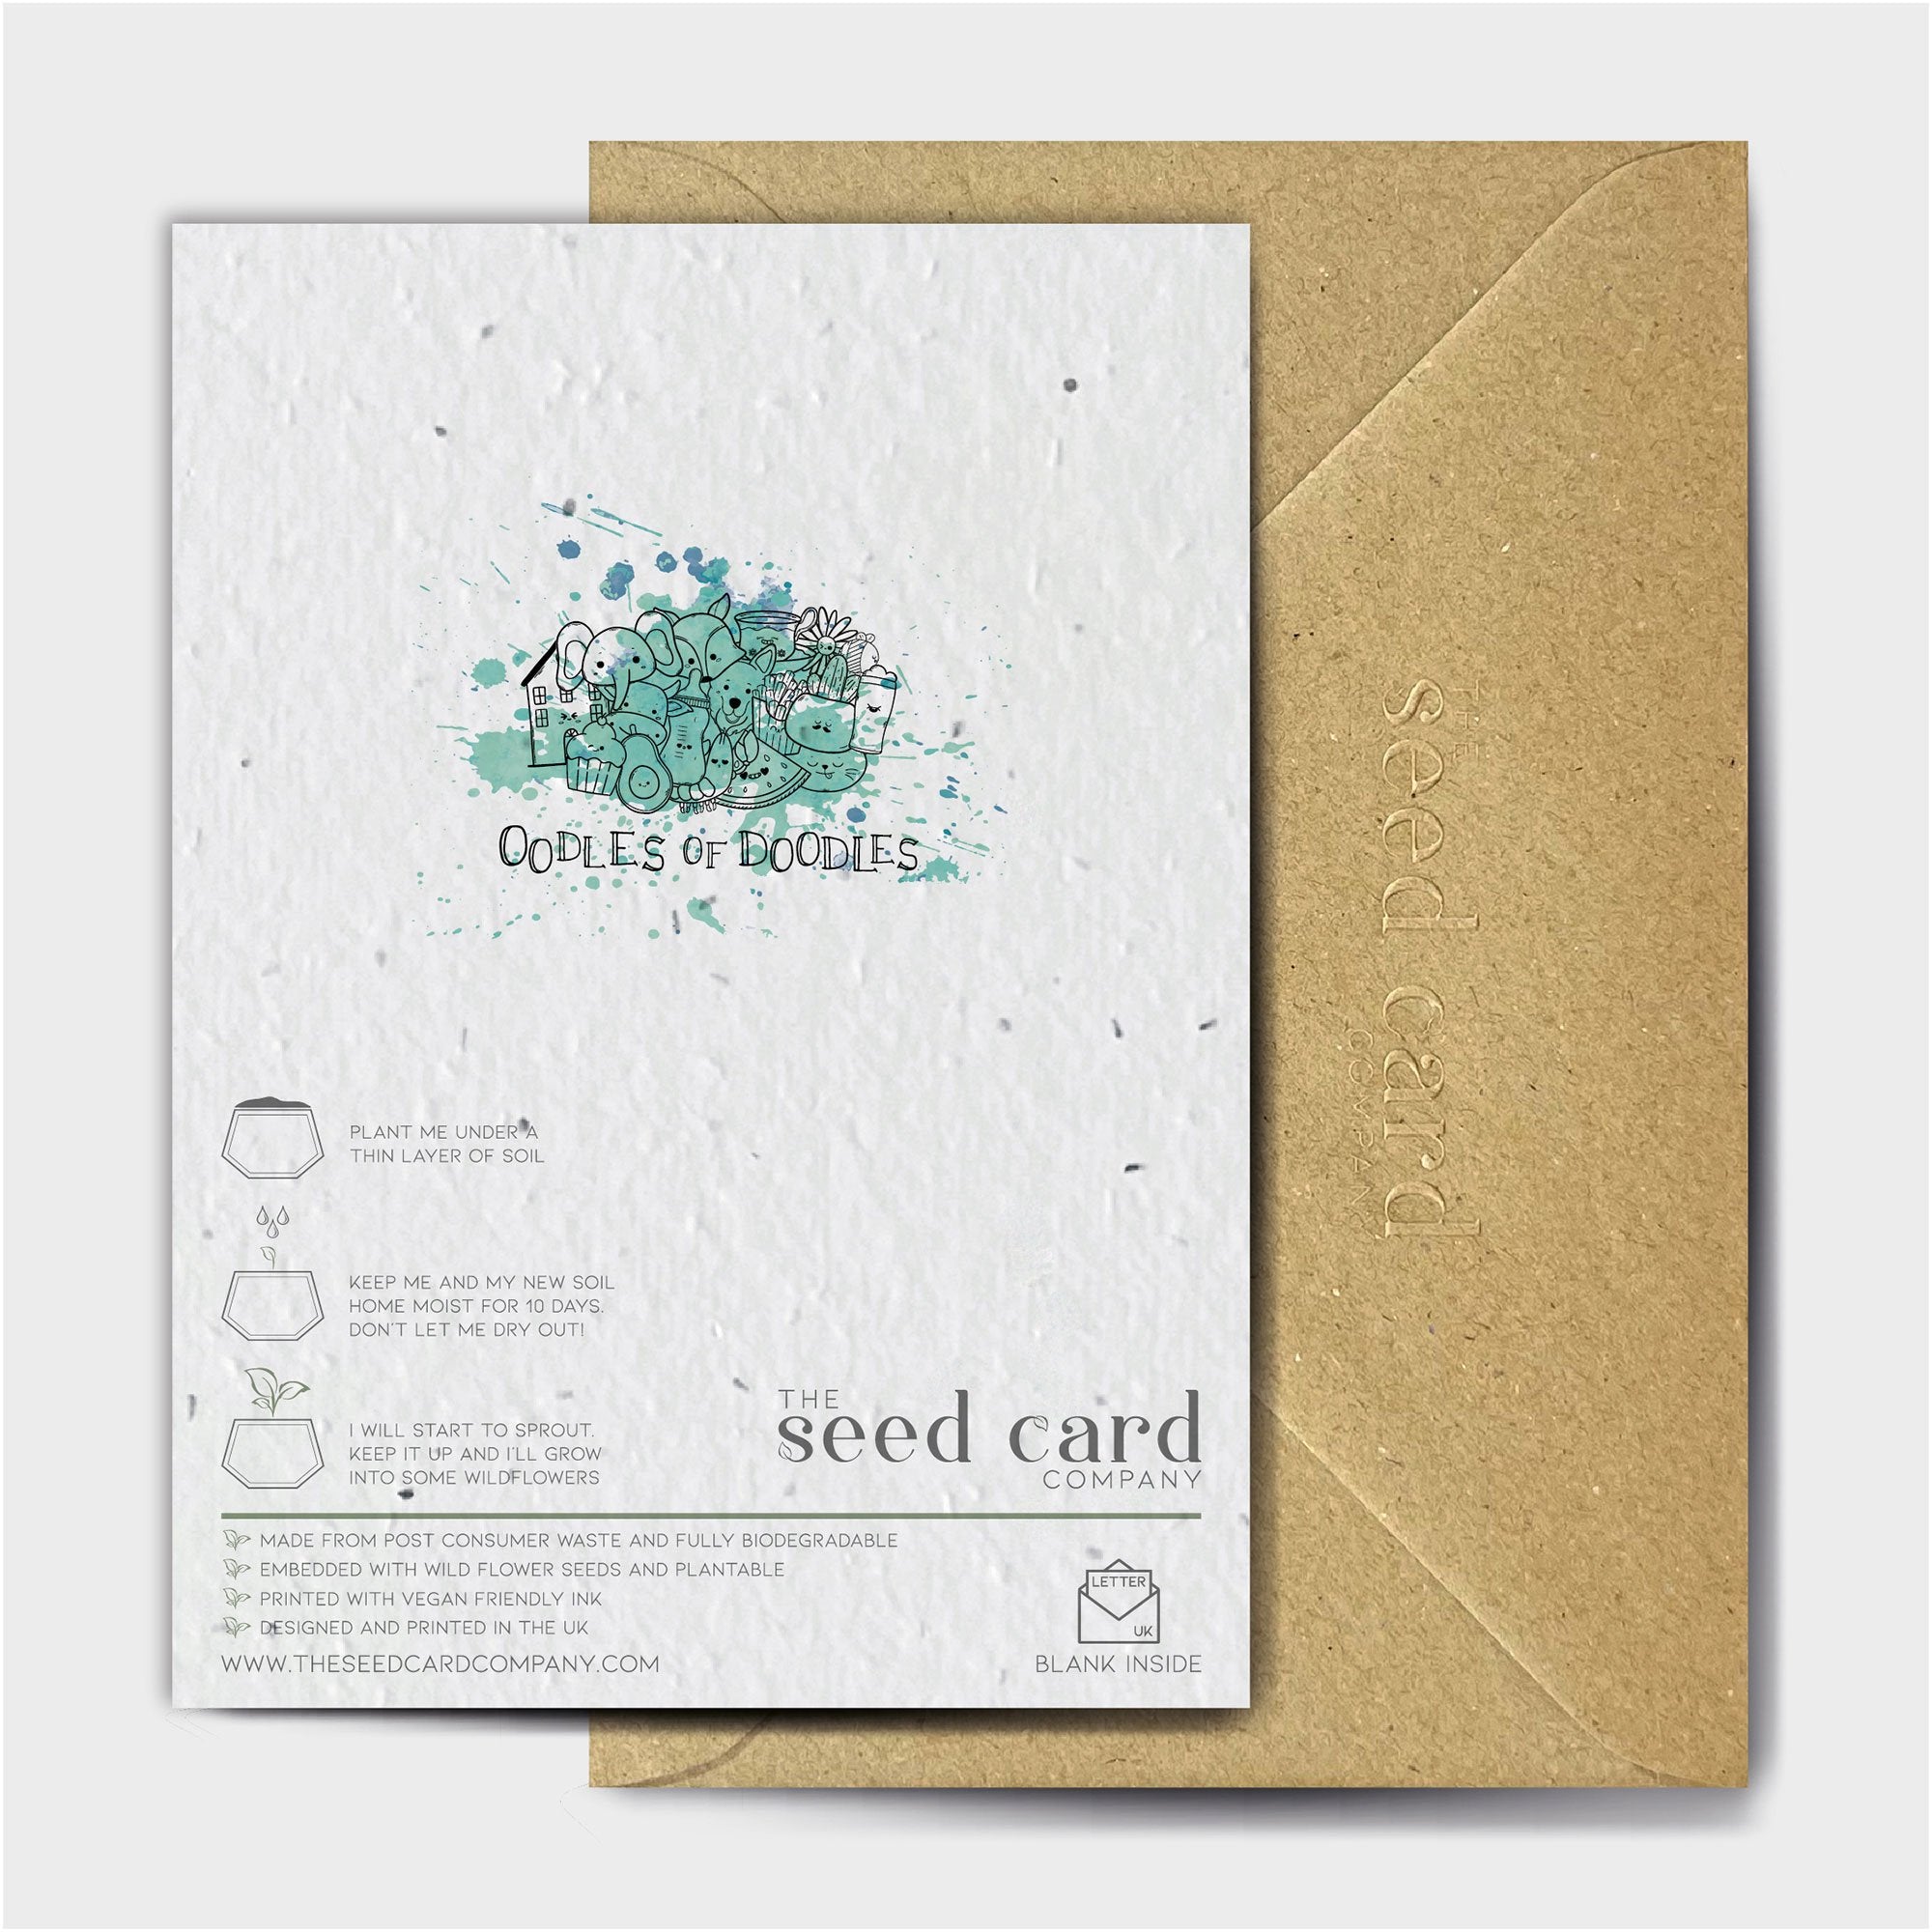 Shop online You're Unbeerleivable - 100% biodegradable seed-embedded cards Shop -The Seed Card Company